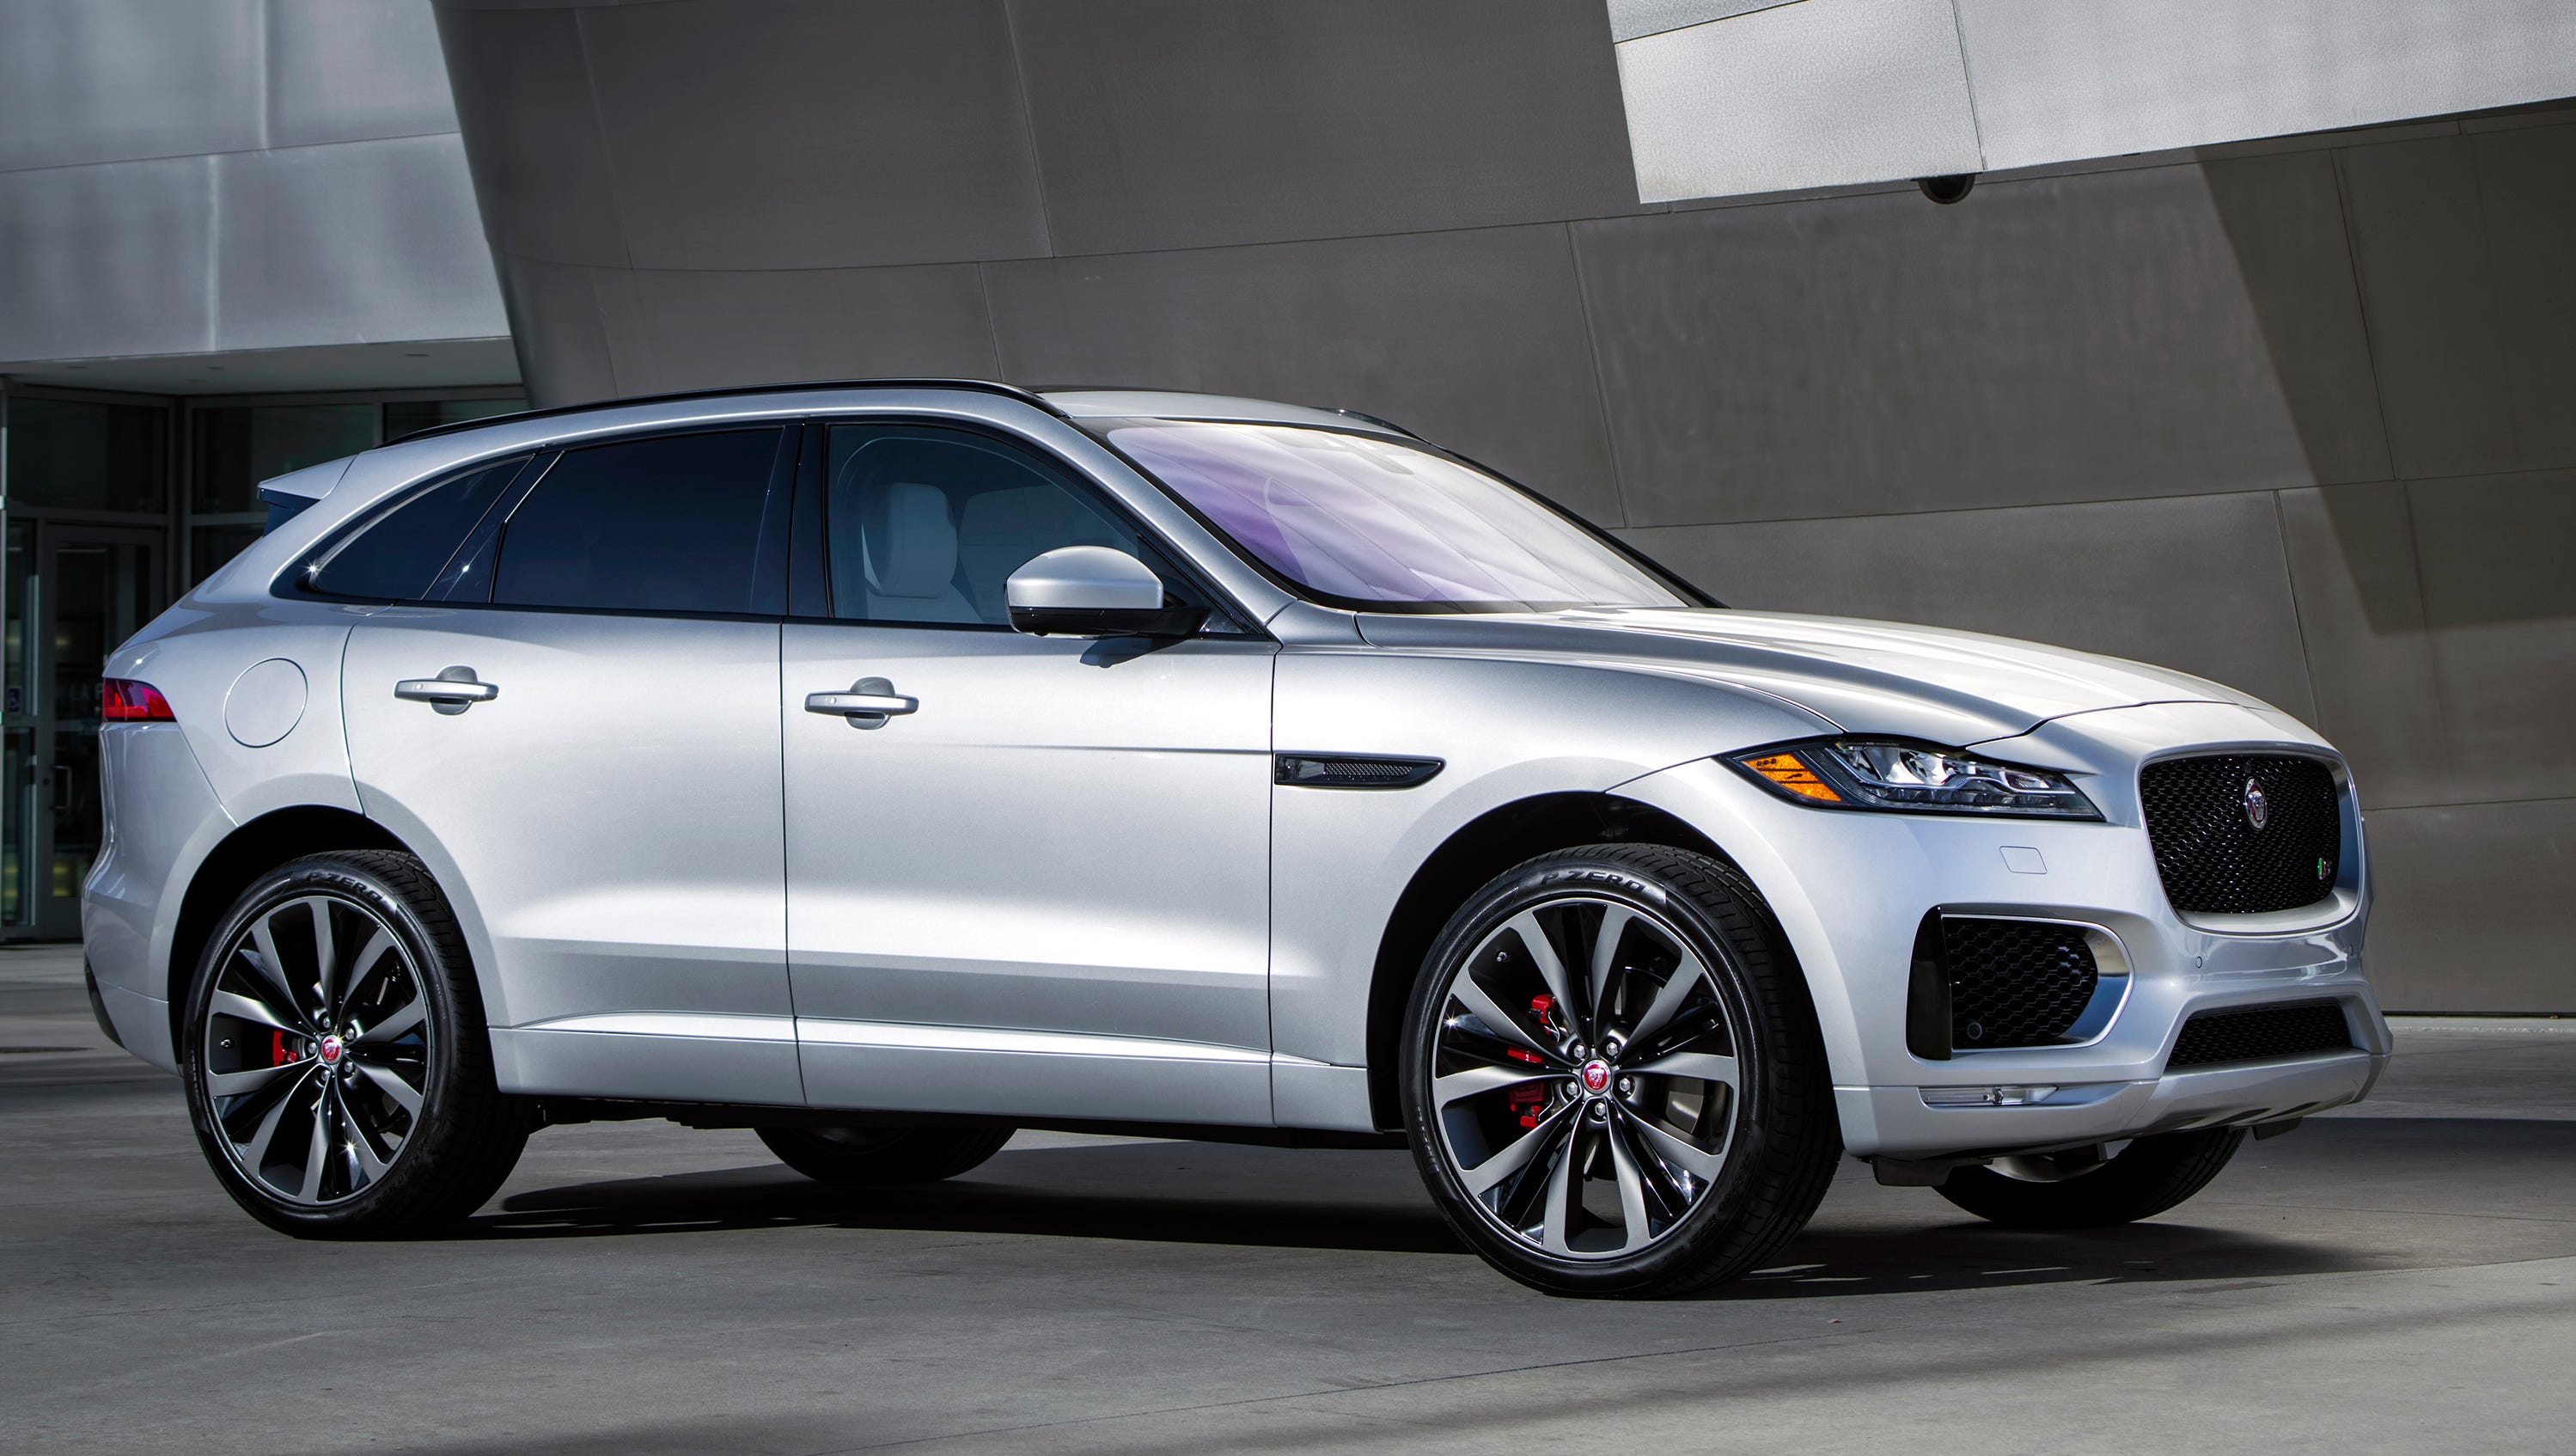 First Drive: 2017 Jaguar XE and F-Pace